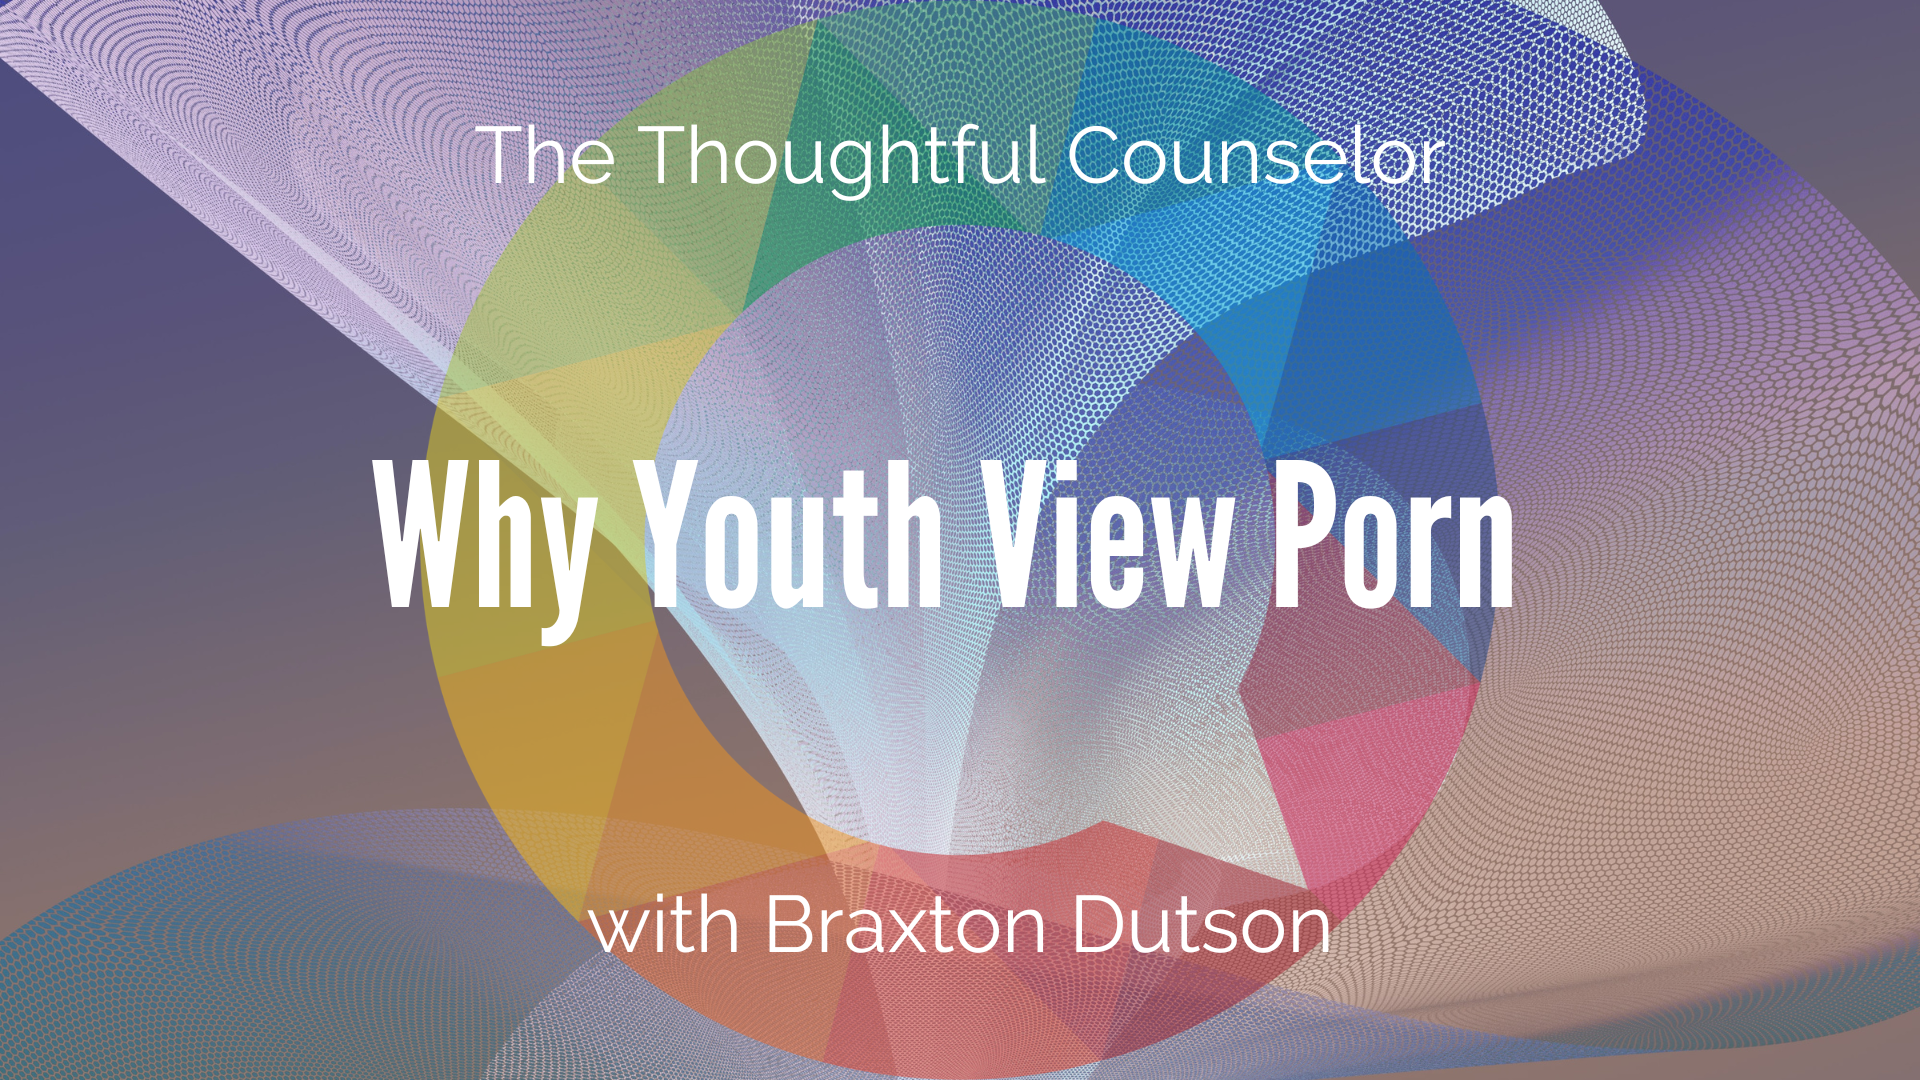 Understanding Why Youth View Pornography: An Interview with Braxton Dutson and Dr. Stacey Diane Arañez Litam